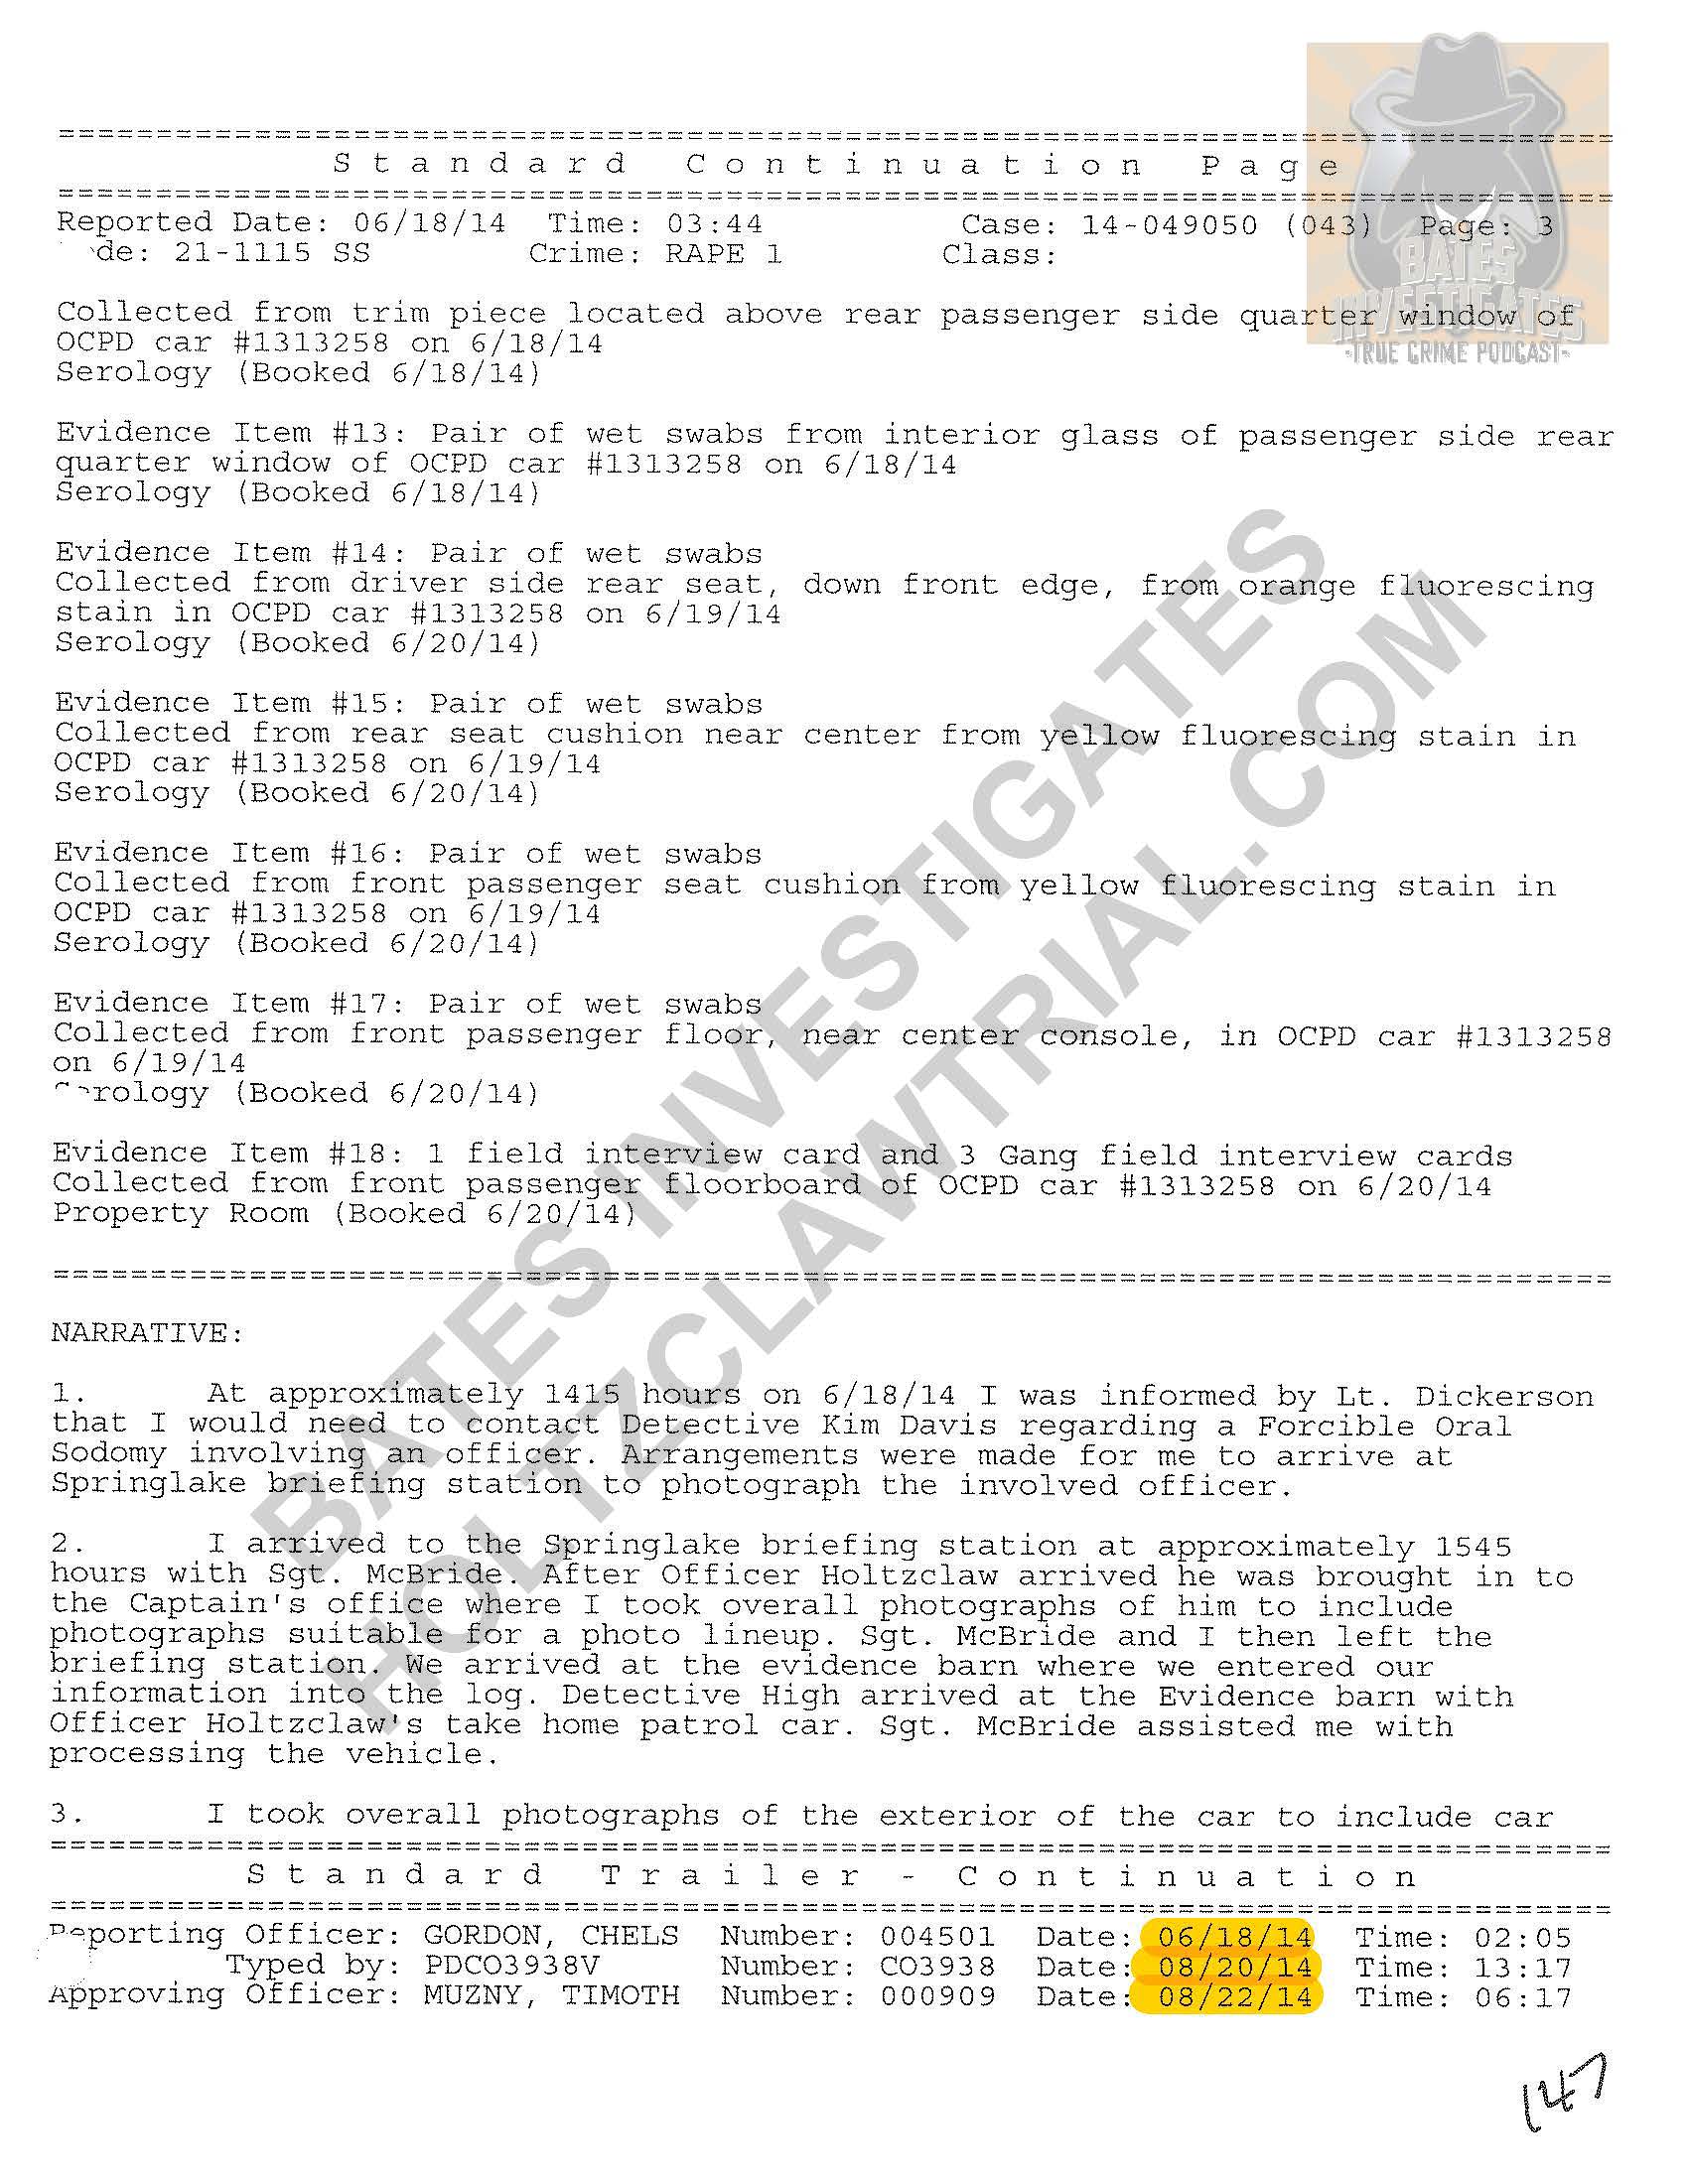 Holtzclaw - Ep02 - Police Reports Watermarked_Page_40.jpg